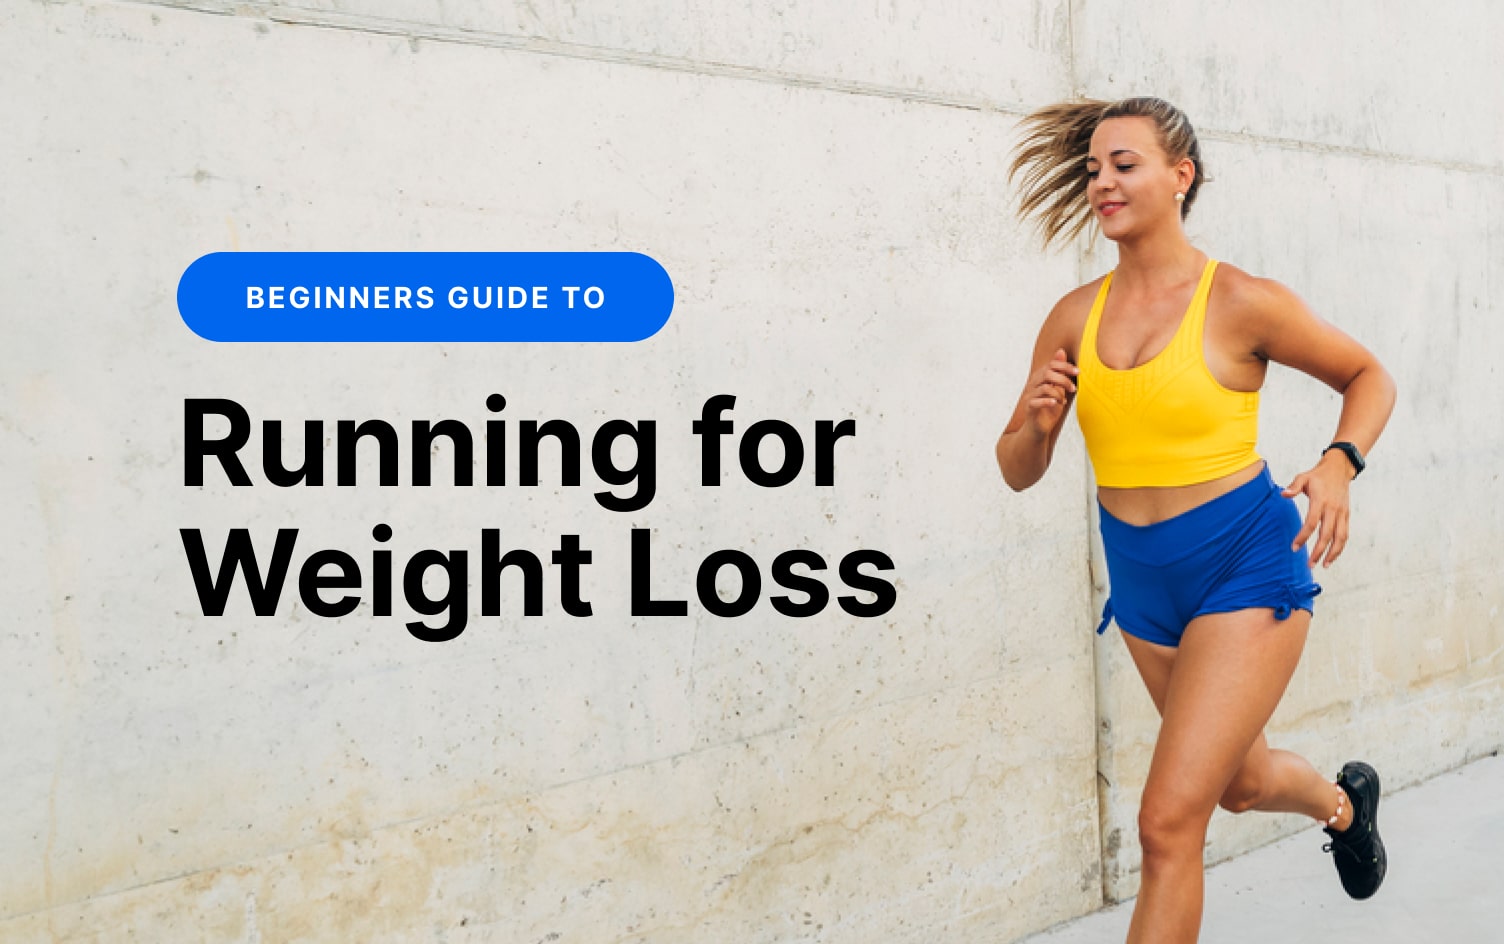 Beginner's Guide to Running For Weight Loss, Fitness